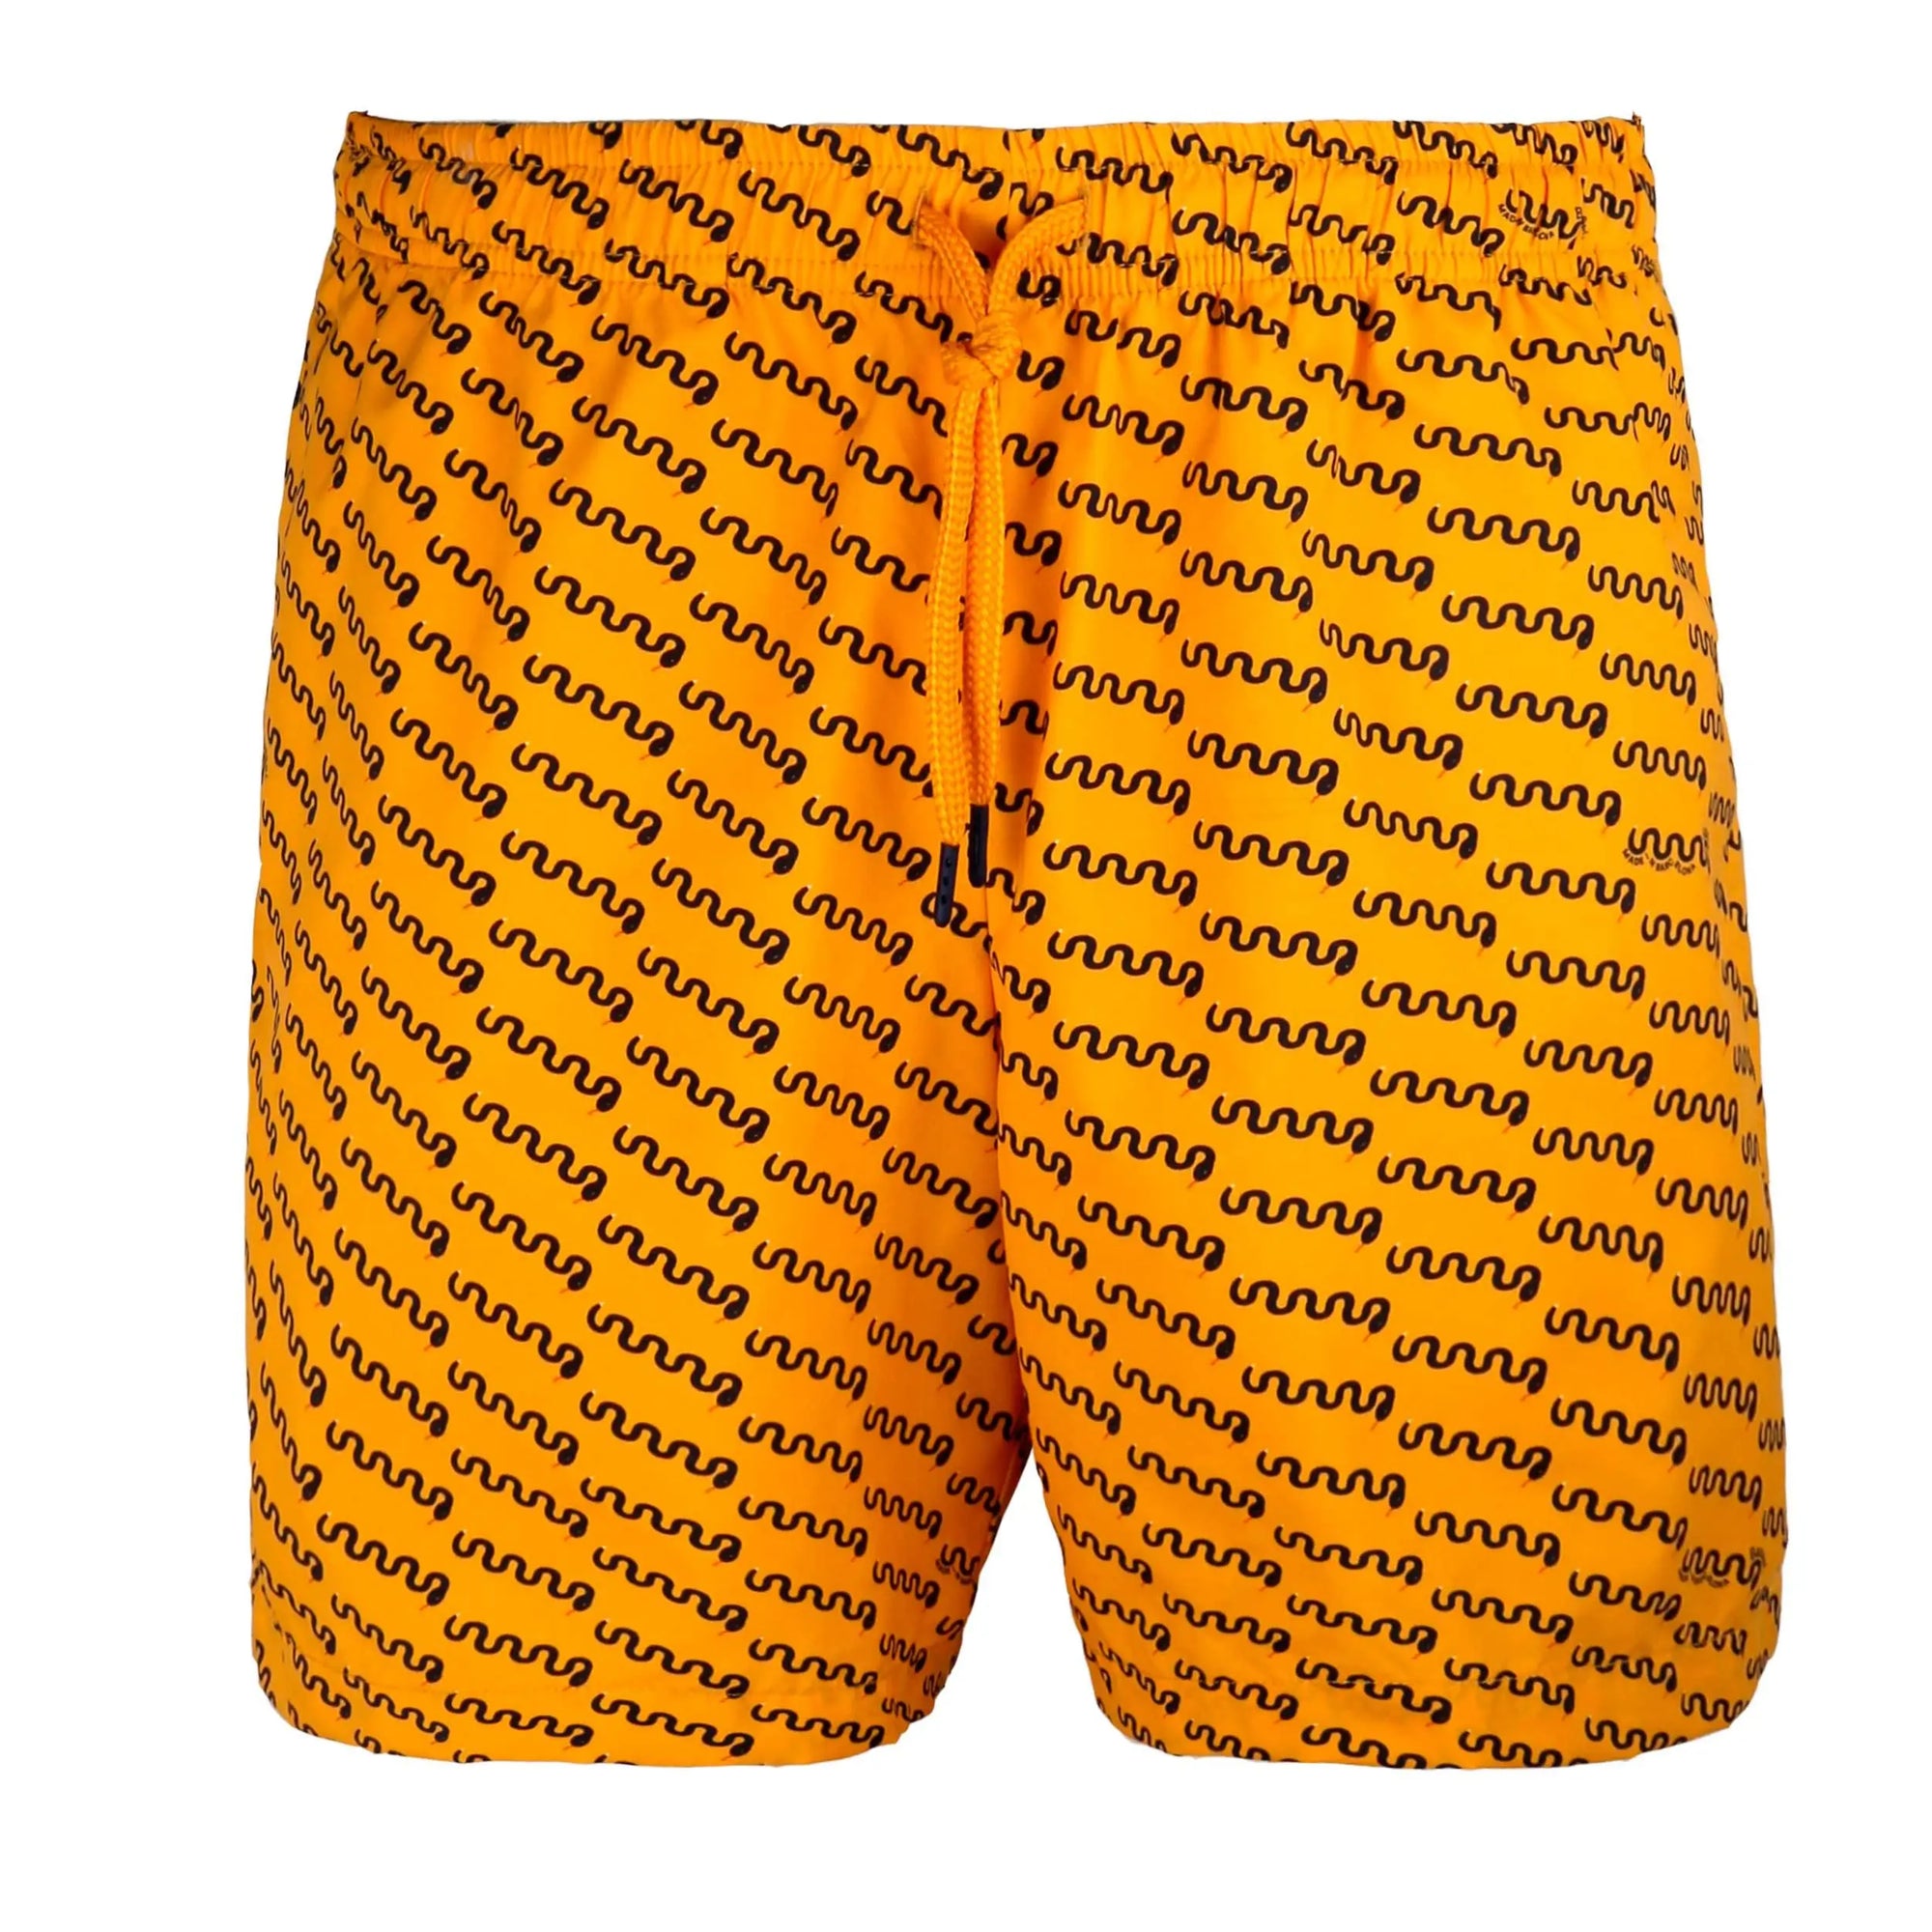 An open white box from bassalstore reveals a folded yellow Mamba Swimwear patterned with dark squiggly lines. The Mamba Swimwear has a blue drawstring and two tags: one reads "Bassal." and the other says, "proudly made for you to wear." The box lid proudly displays the brand name "Bassal" from Barcelona.